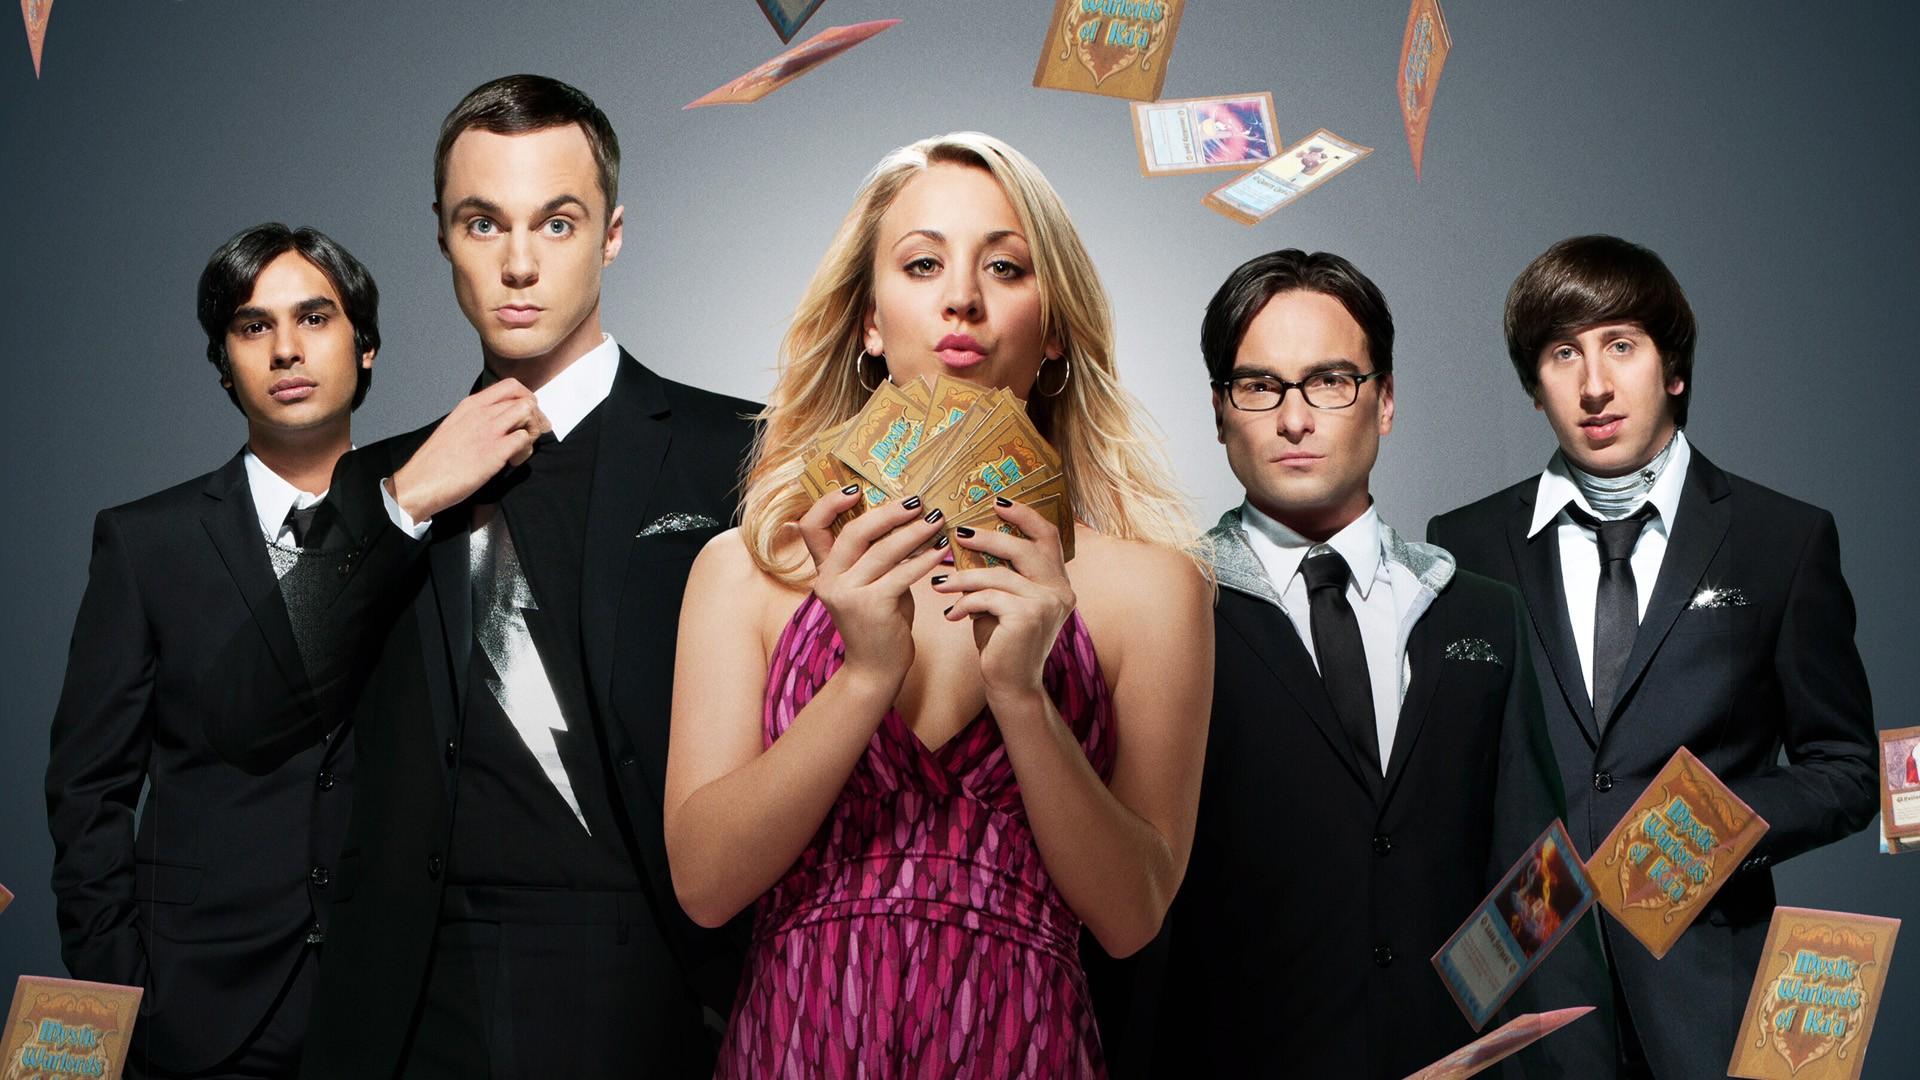 cards, Kaley Cuoco, Jim Parsons, TV posters, photomanipulations